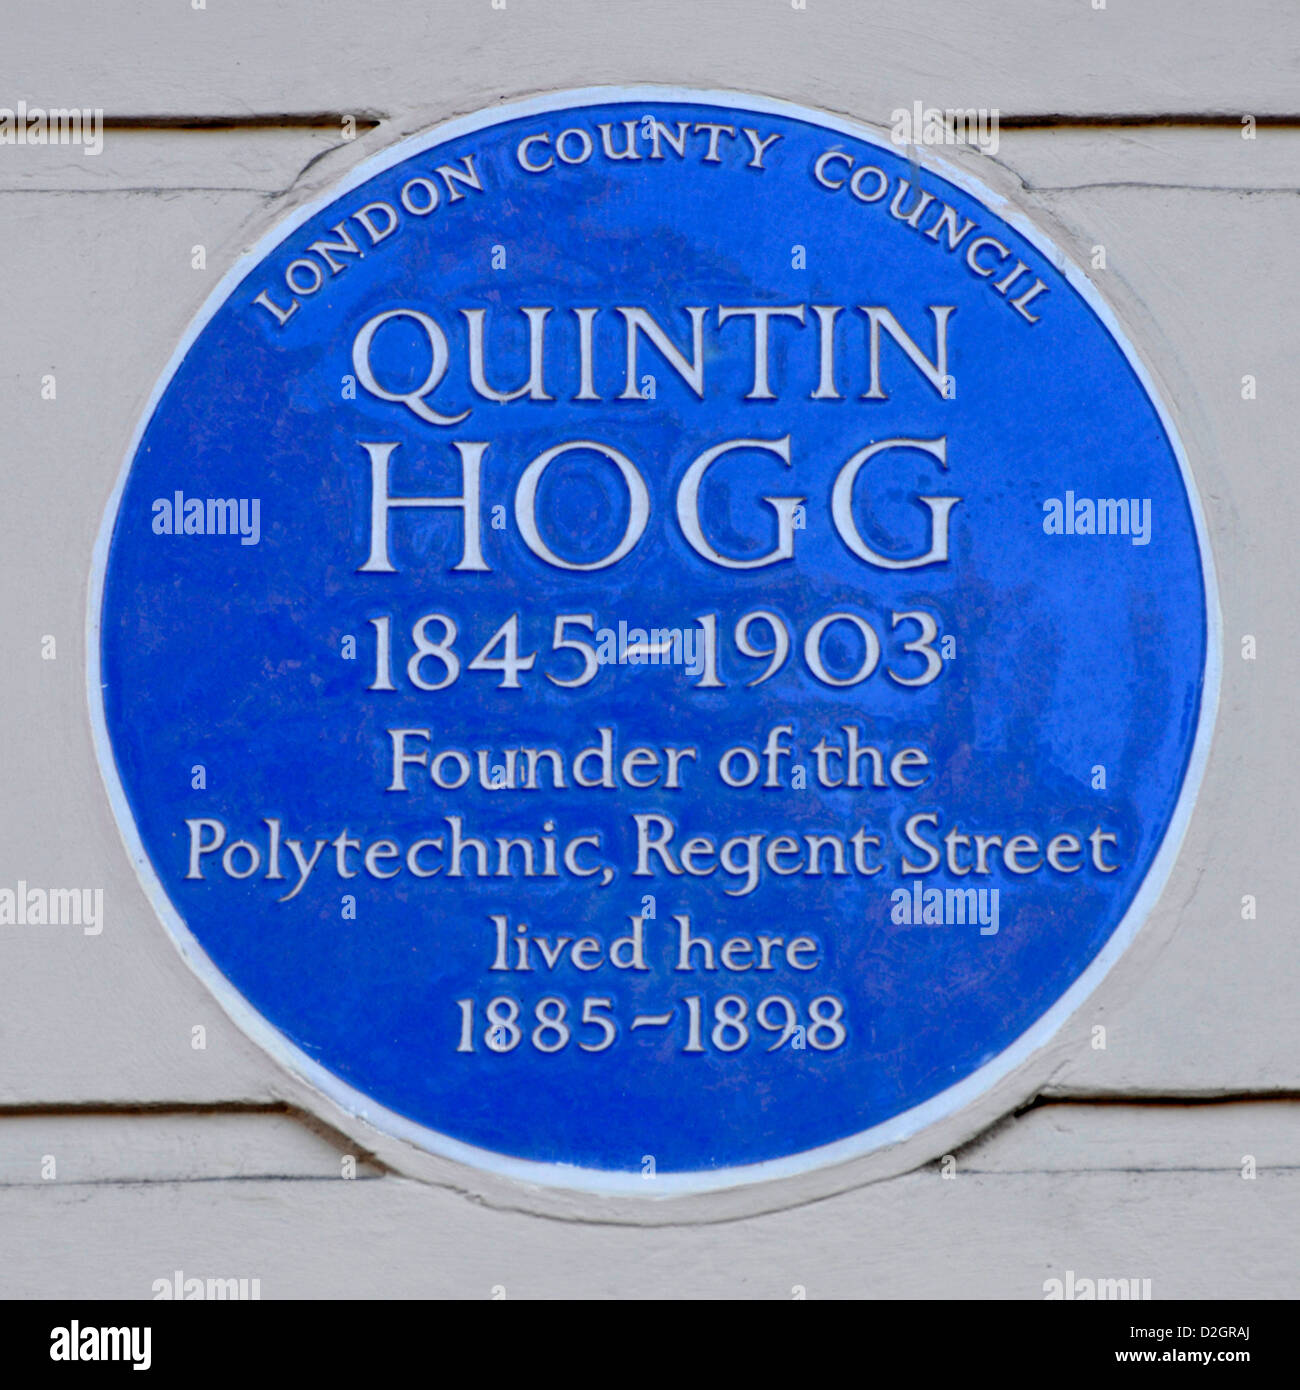 Blue plaque about Quintin Hogg founder of the Regent Street Polytechnic lived here at 5 Cavendish Square London England UK Stock Photo